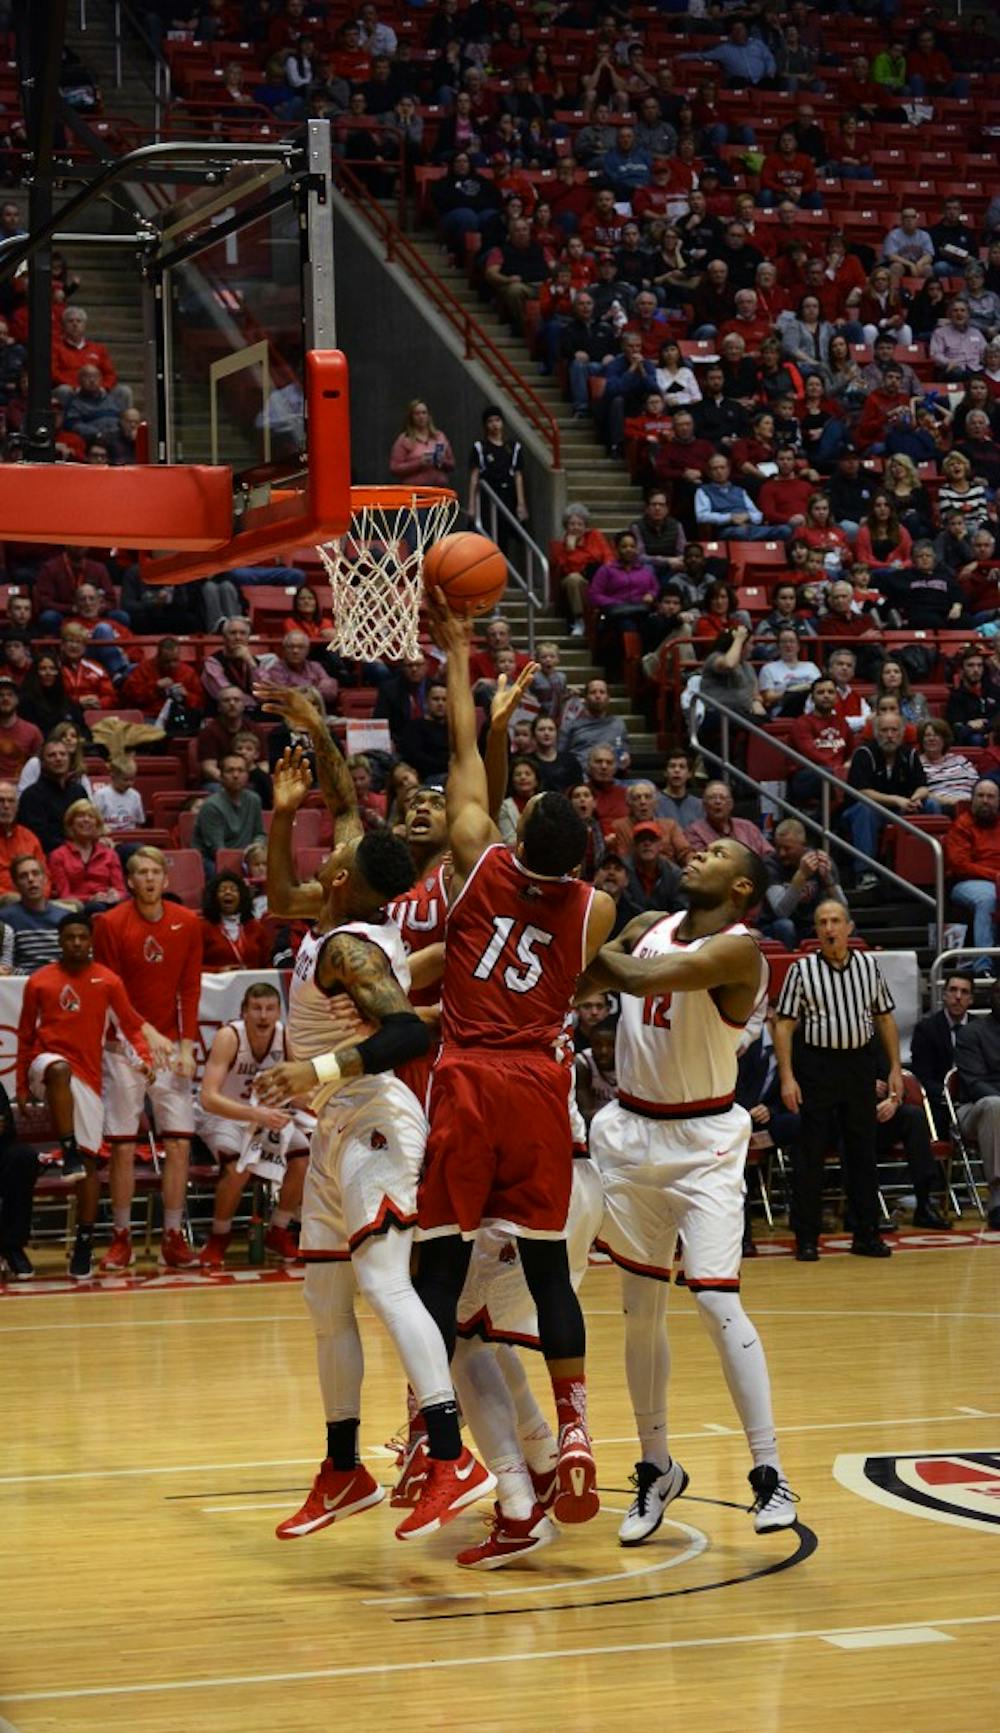 The men's basketball attempts to keep the rebound away from Northern Illinois during the game on Feb 19 in Worthen Arena. DN PHOTO KORINA VALENZUELA